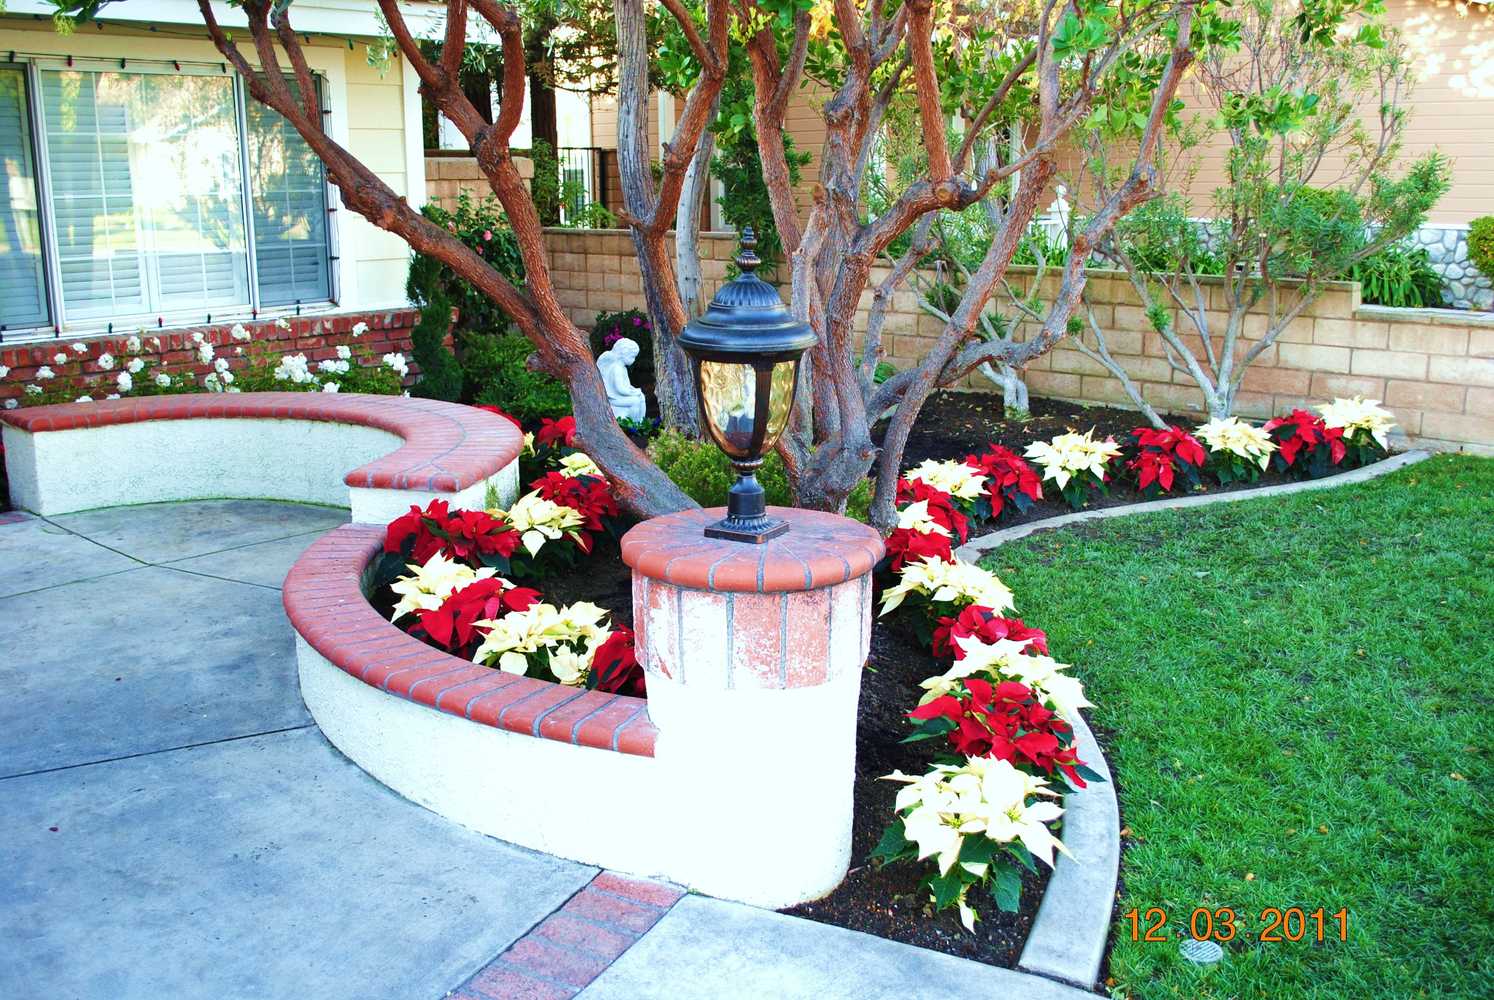 PAM'S CHRISTMAS PARTY LANDSCAPING